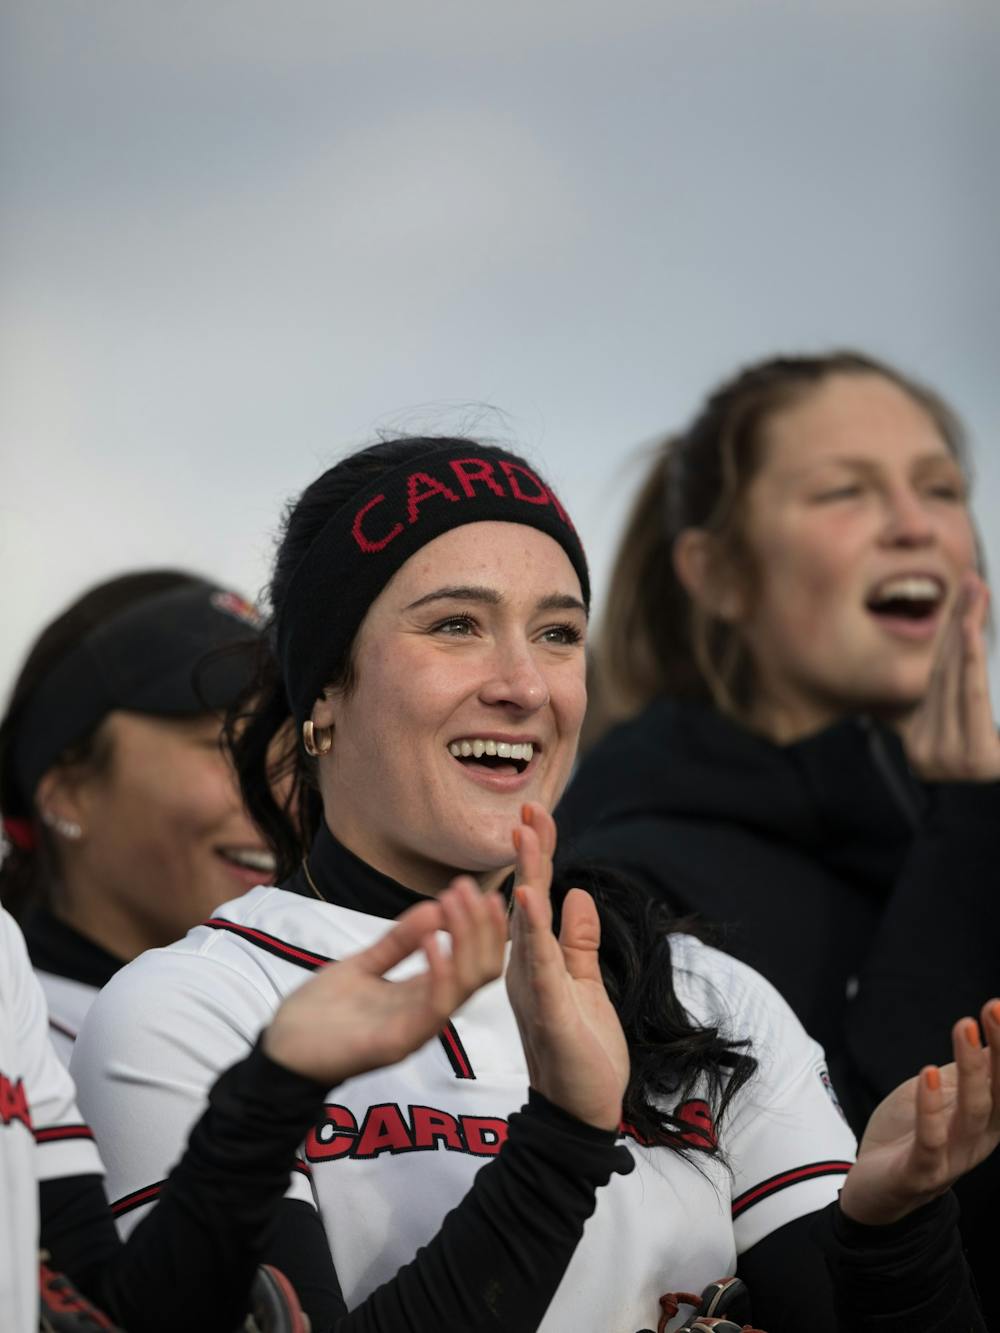 Senior Faith Hensley sings the Ball State fight song along with her teammates after the second game during the second game of Ball State Softball's doubleheader against Kent State April 1 at the First Merchants Ballpark Complex. The Cardinals will take on Kent State again April 2 at 1:00 p.m. at the First Merchants Ballpark Complex, completing their short stay at home. Eli Houser, DN